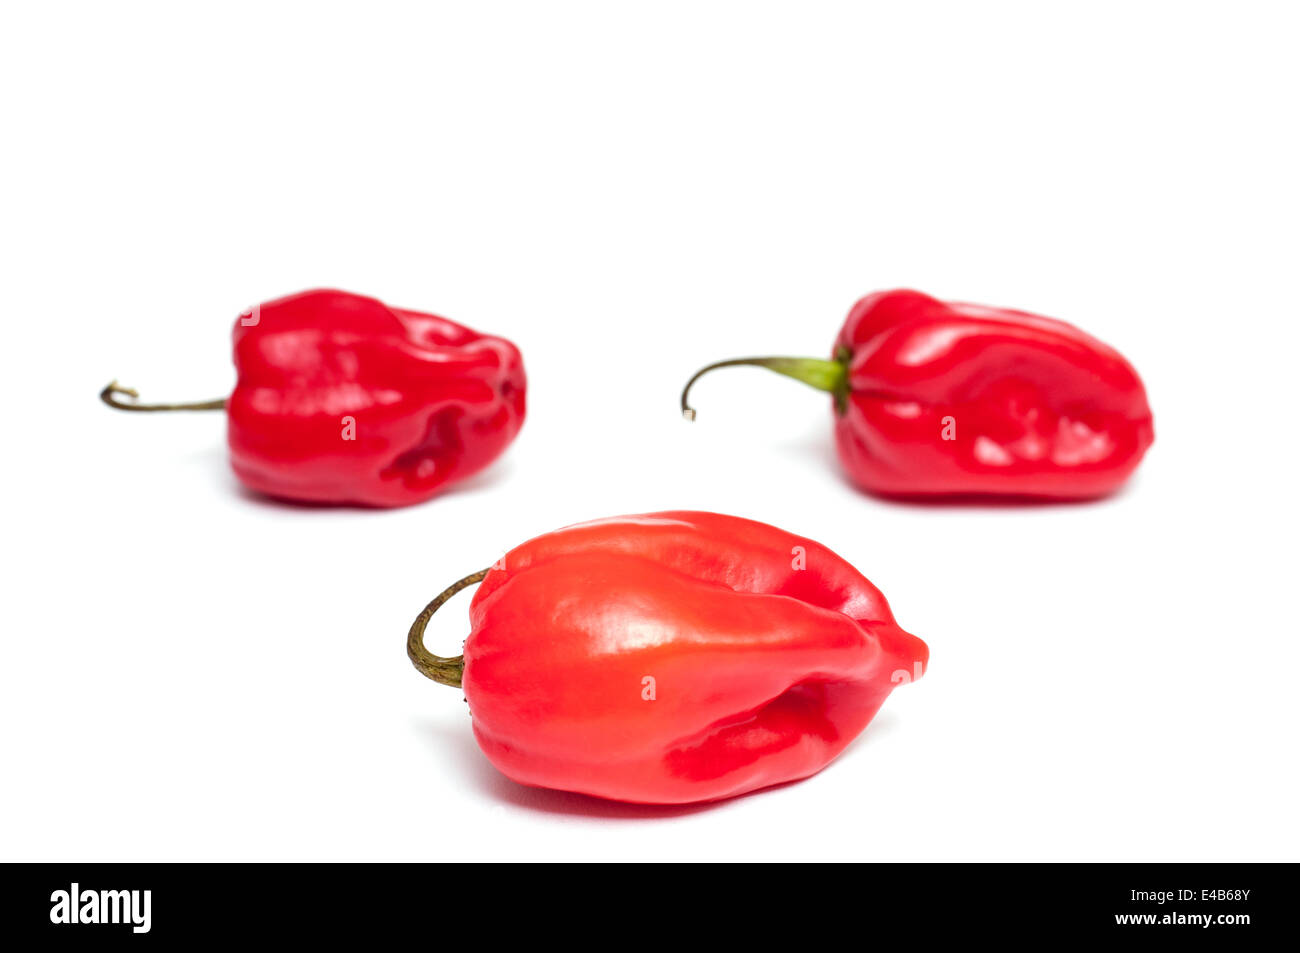 Three red chili peppers Stock Photo